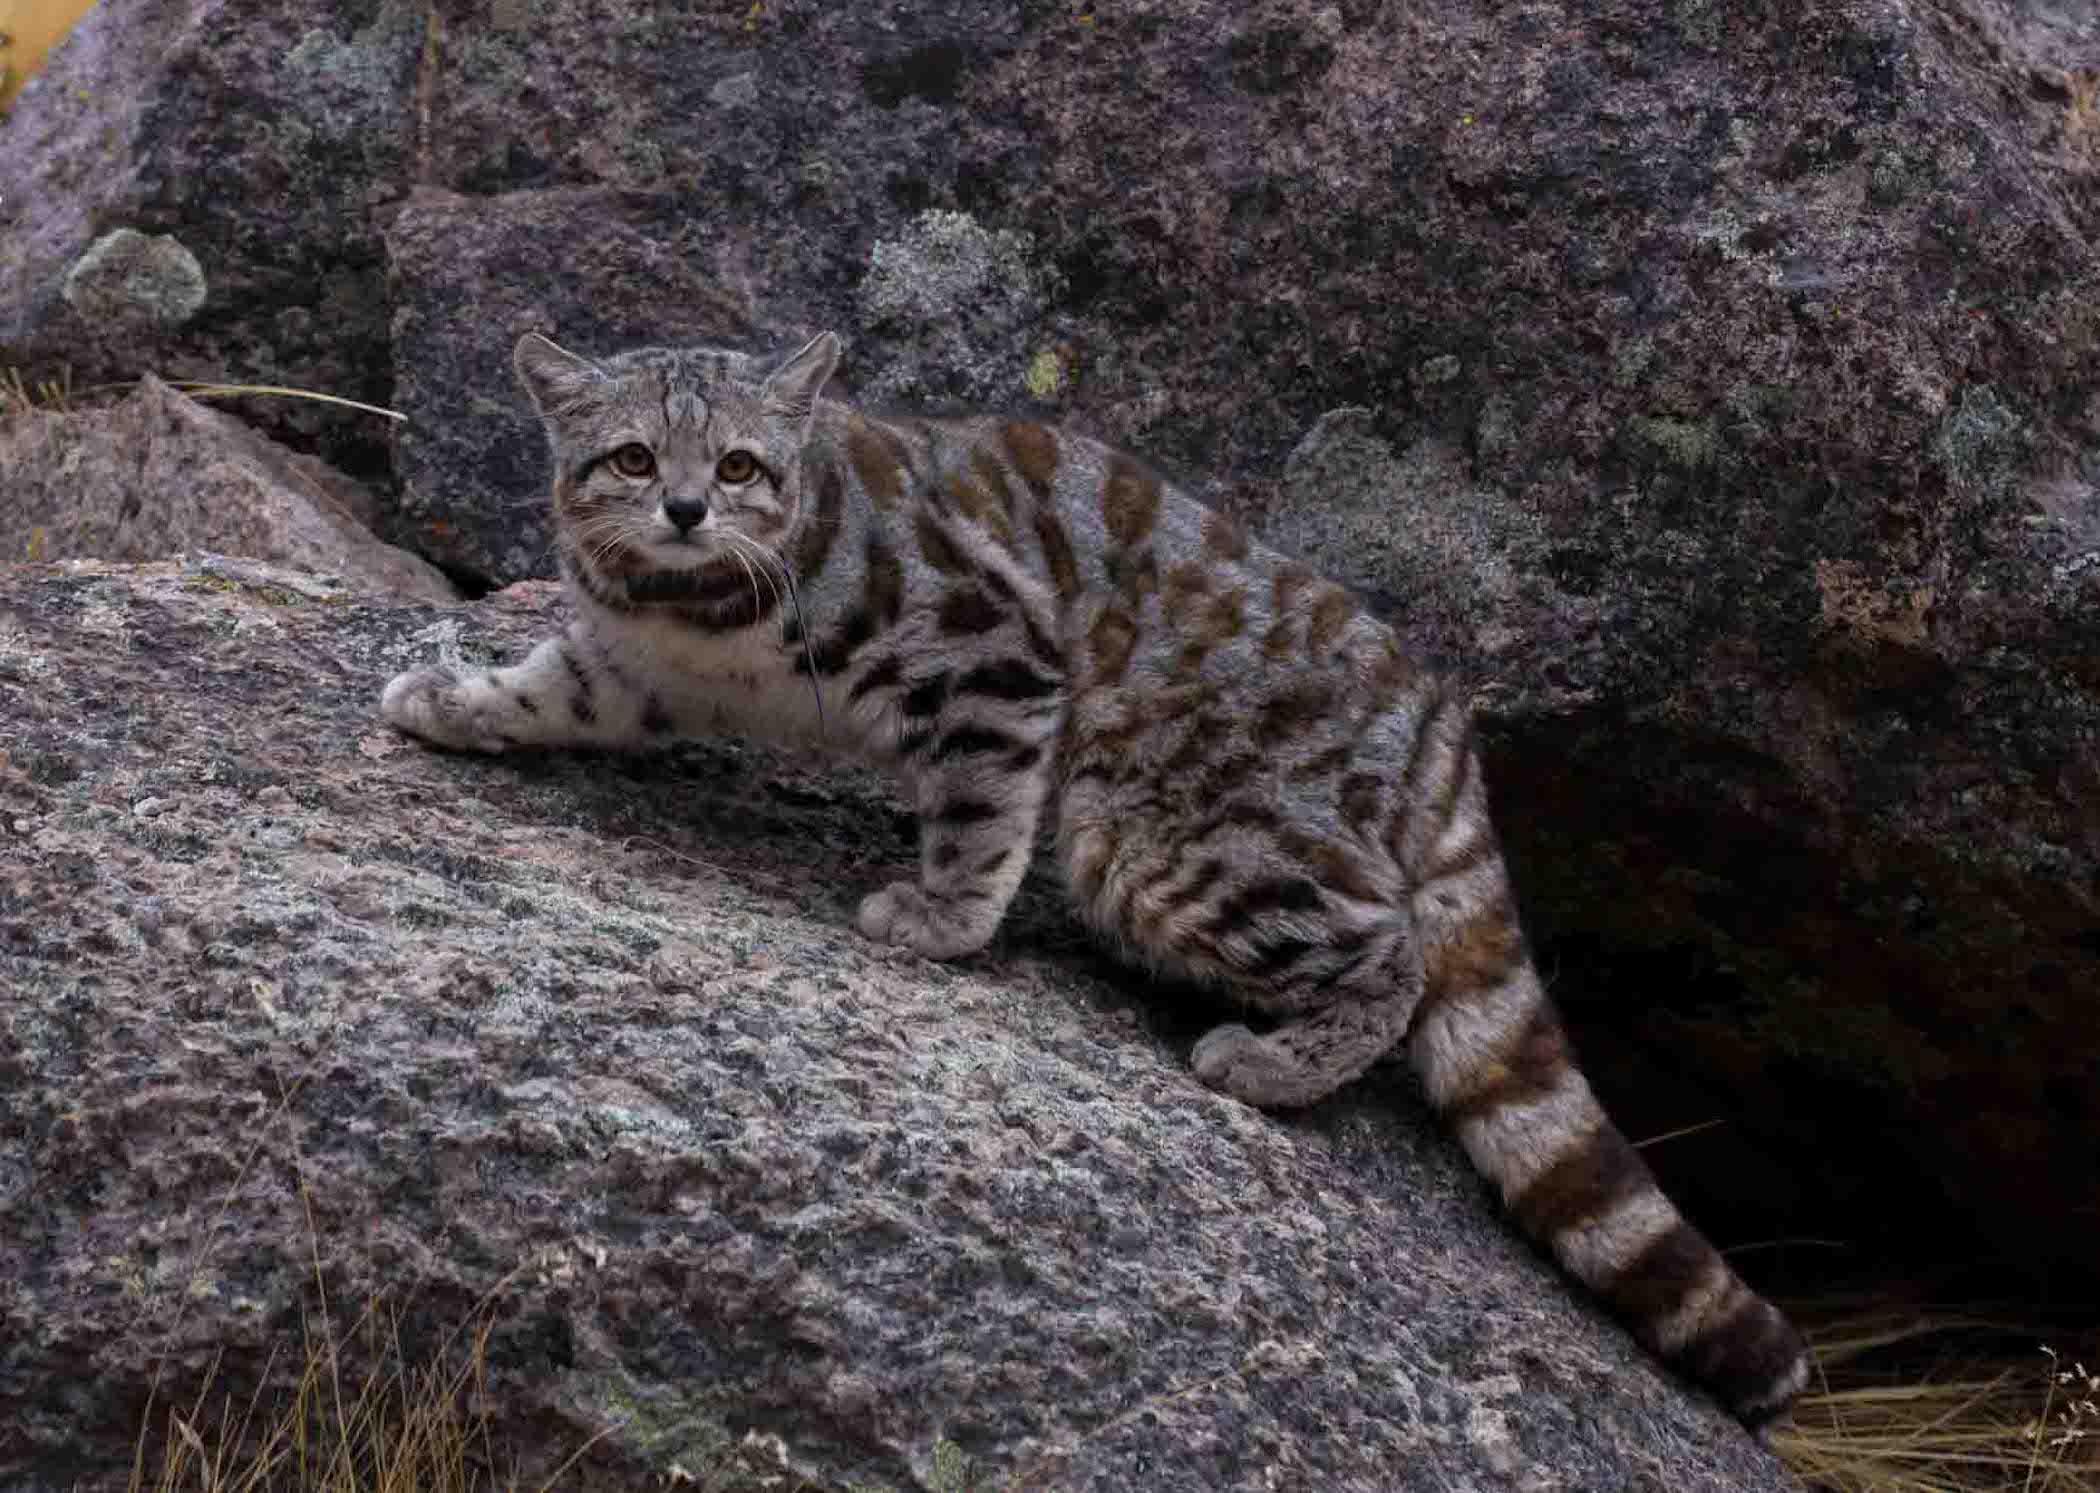 Learning About Andean Cats, a Cat You Don't See